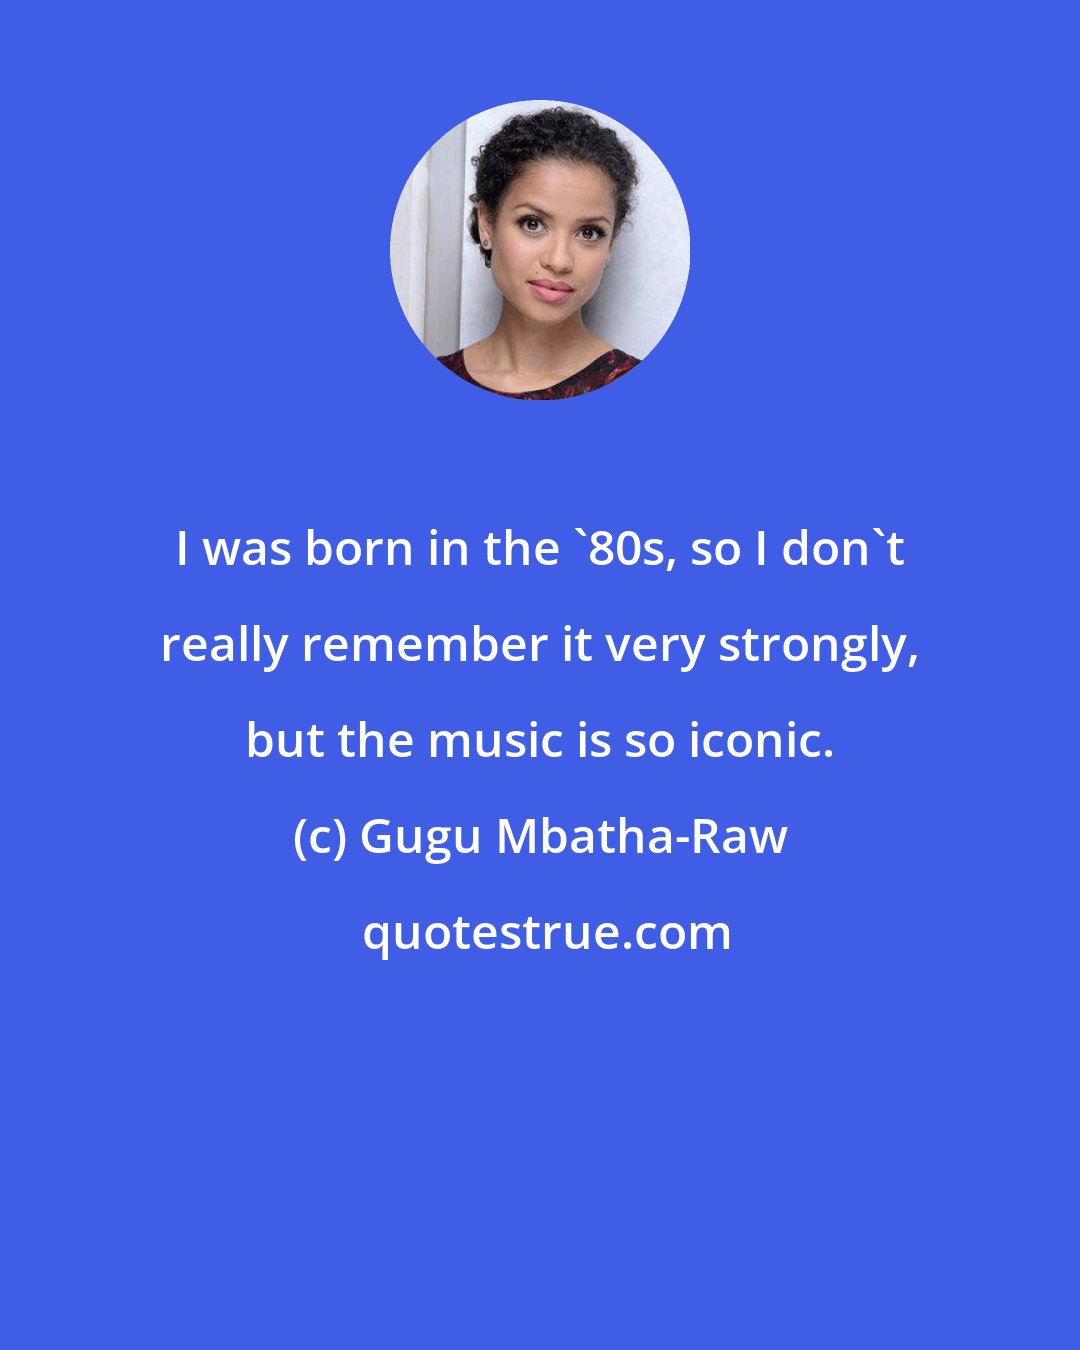 Gugu Mbatha-Raw: I was born in the '80s, so I don't really remember it very strongly, but the music is so iconic.